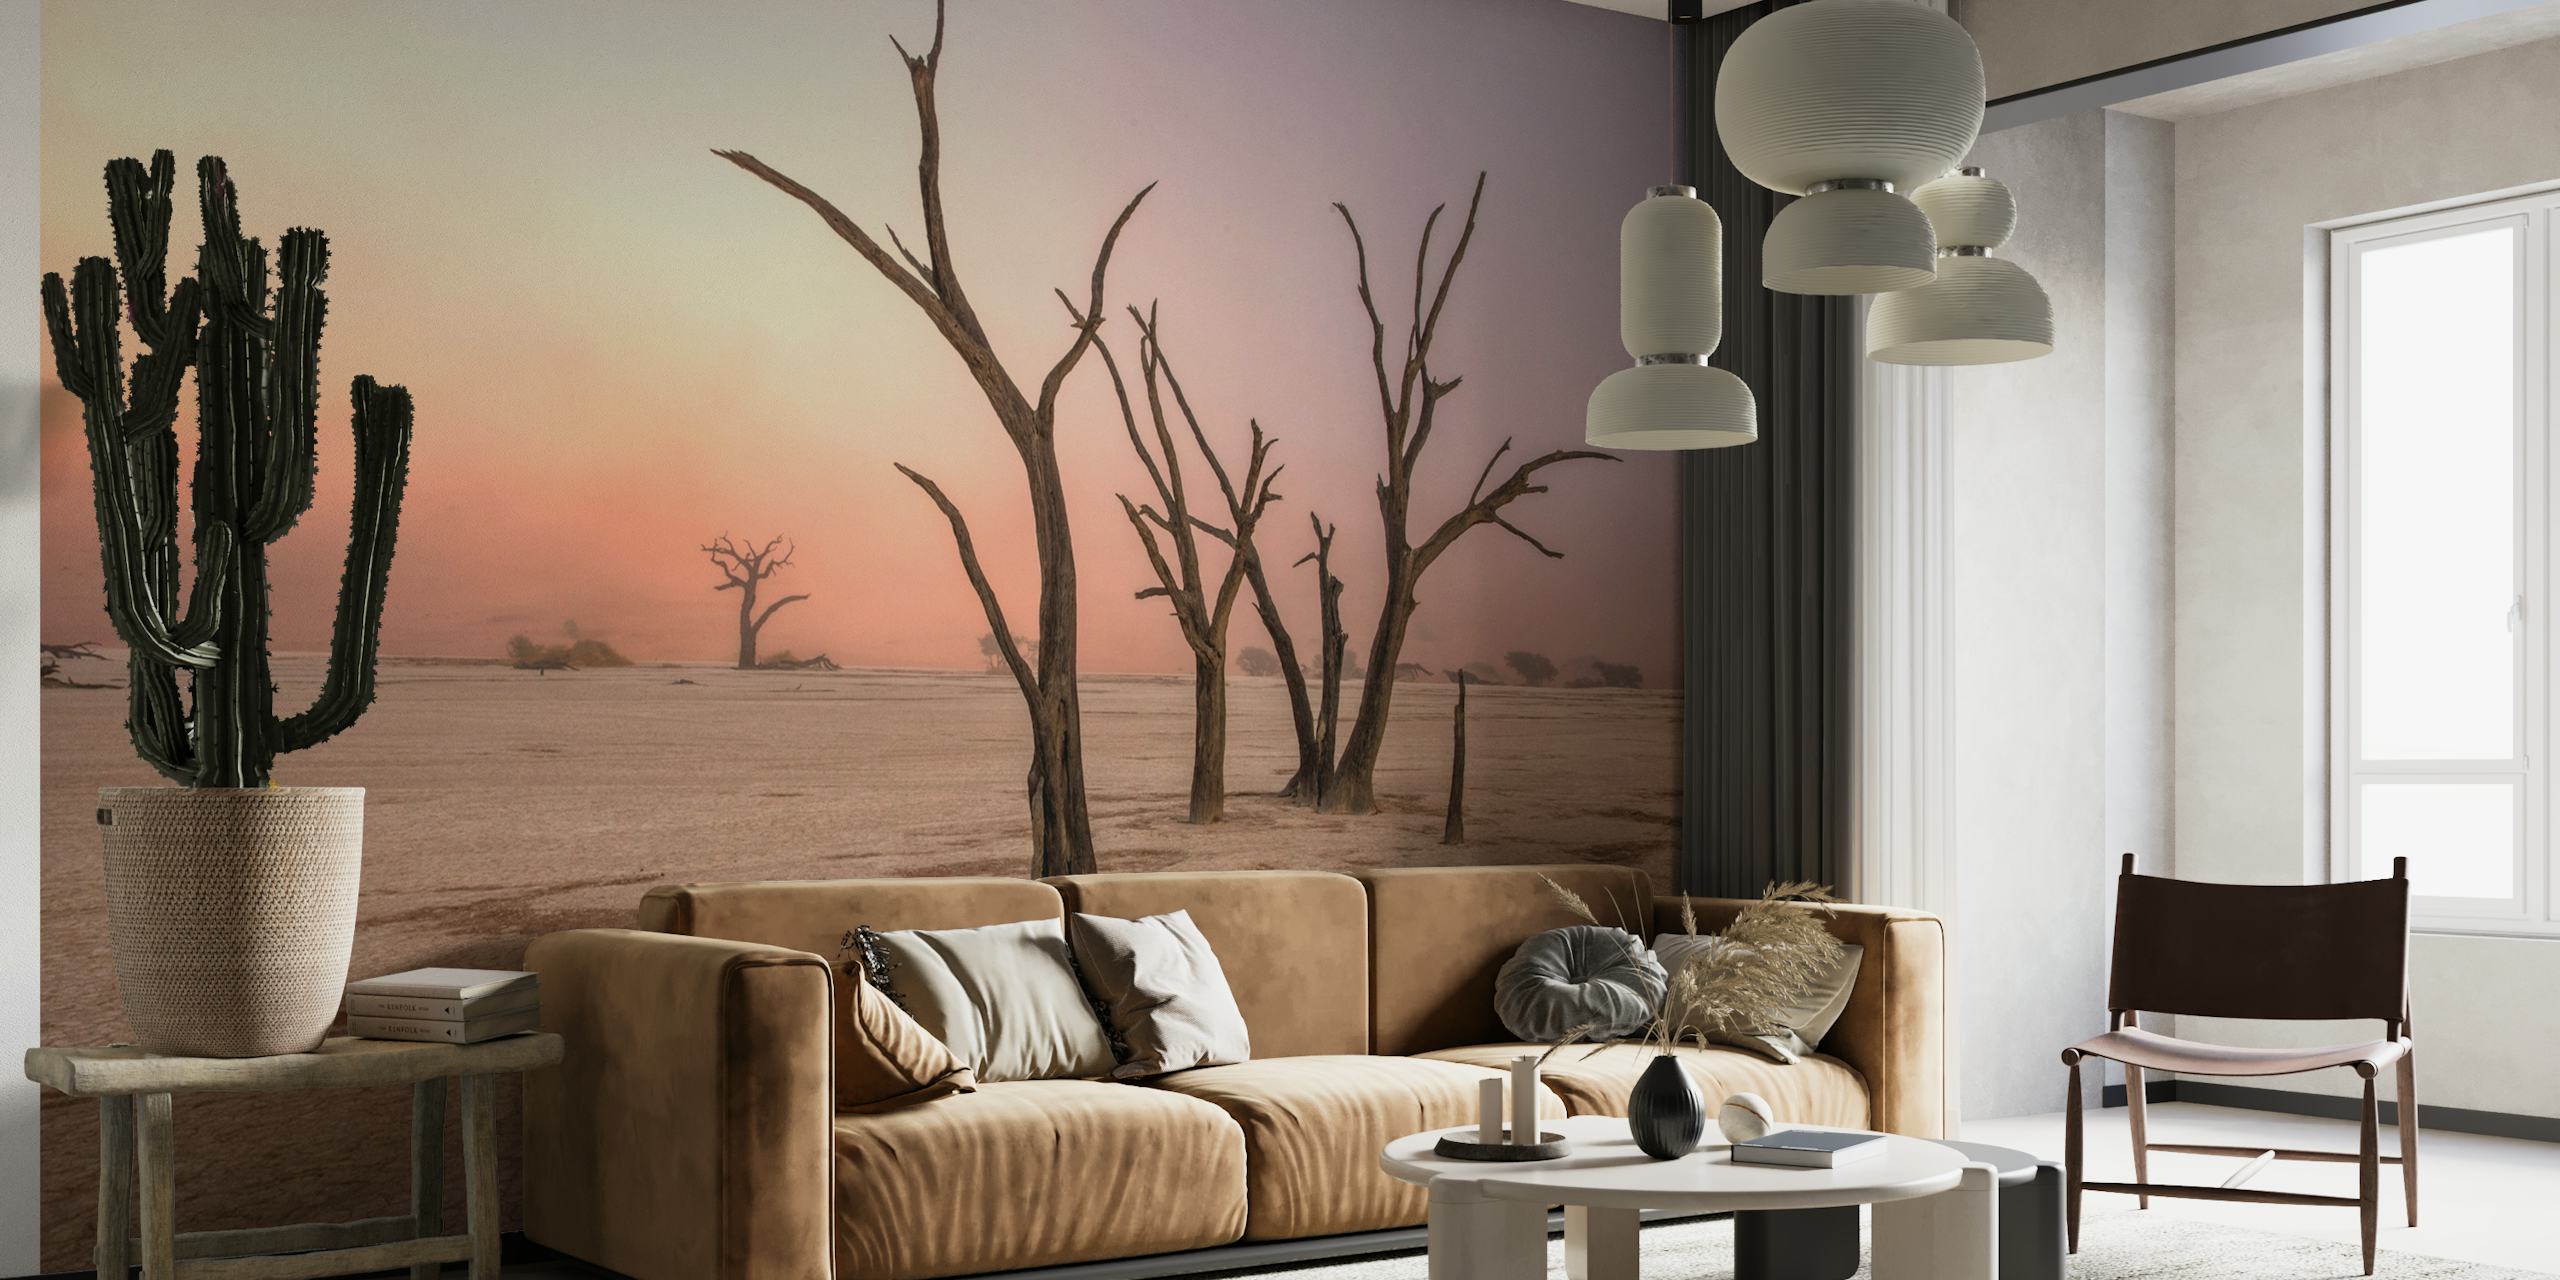 Fog in Deadvlei wall mural featuring camel thorn trees and misty sunrise